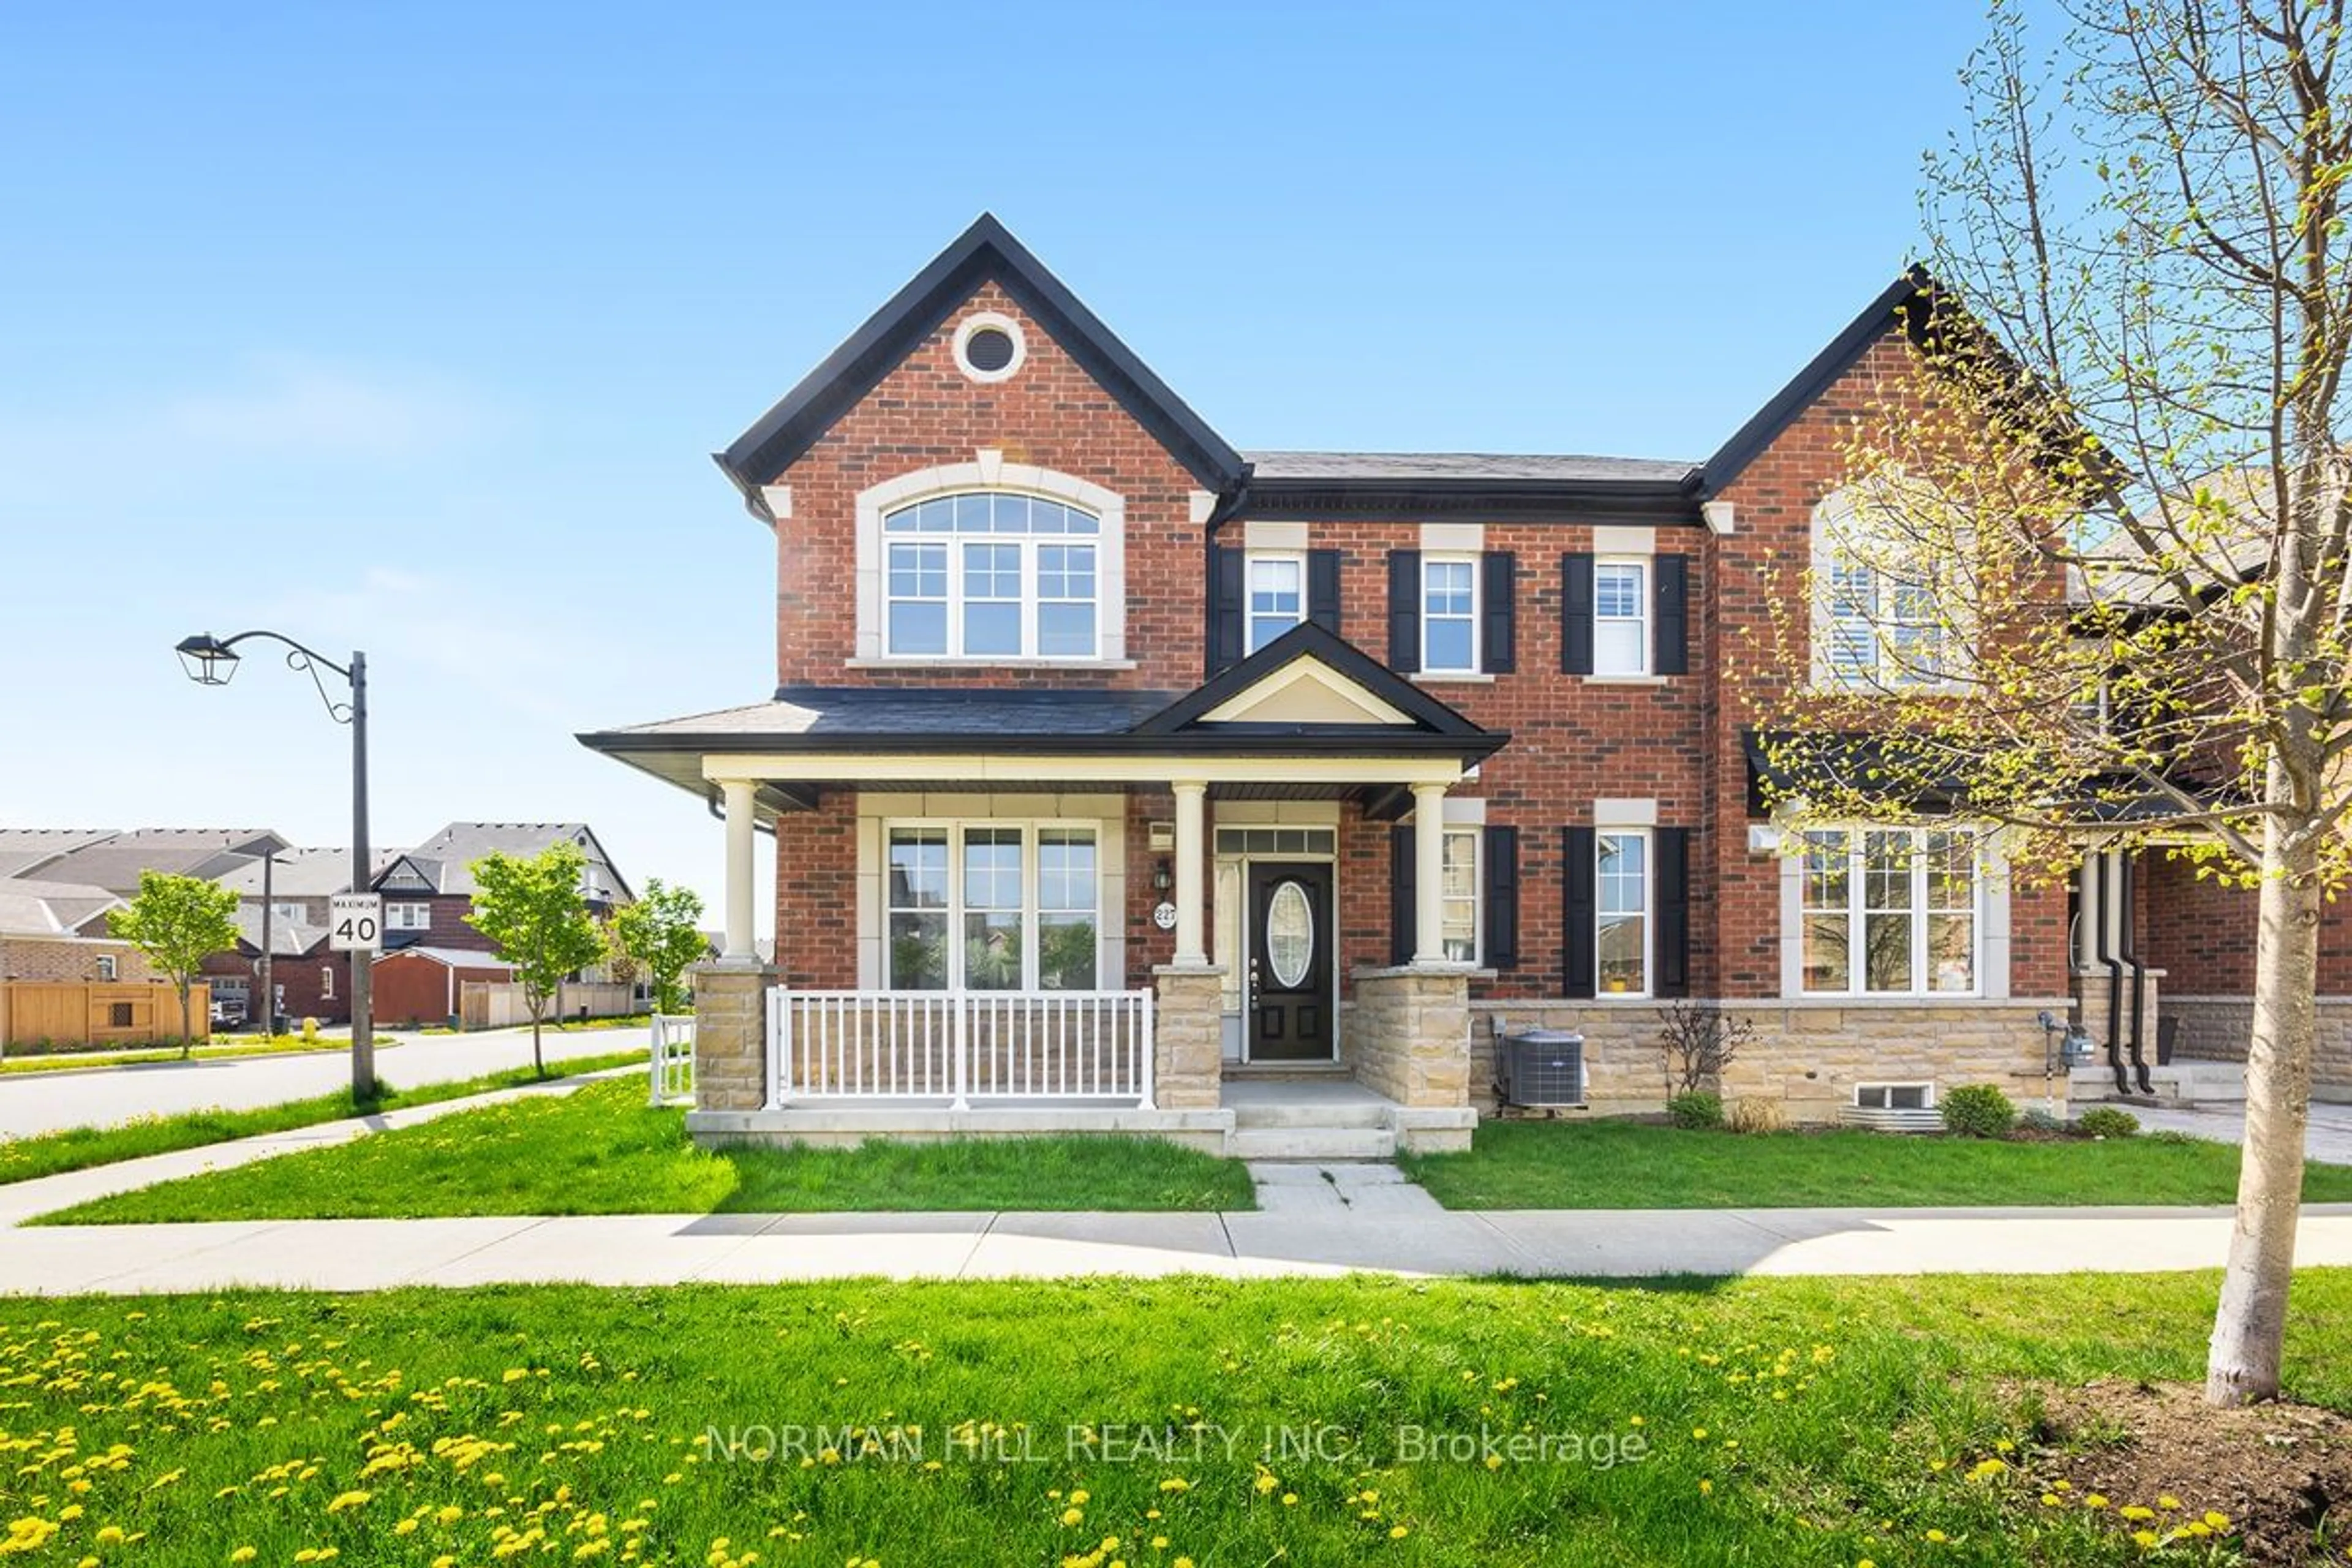 Home with brick exterior material for 227 Almira Ave, Markham Ontario L6B 0Z2